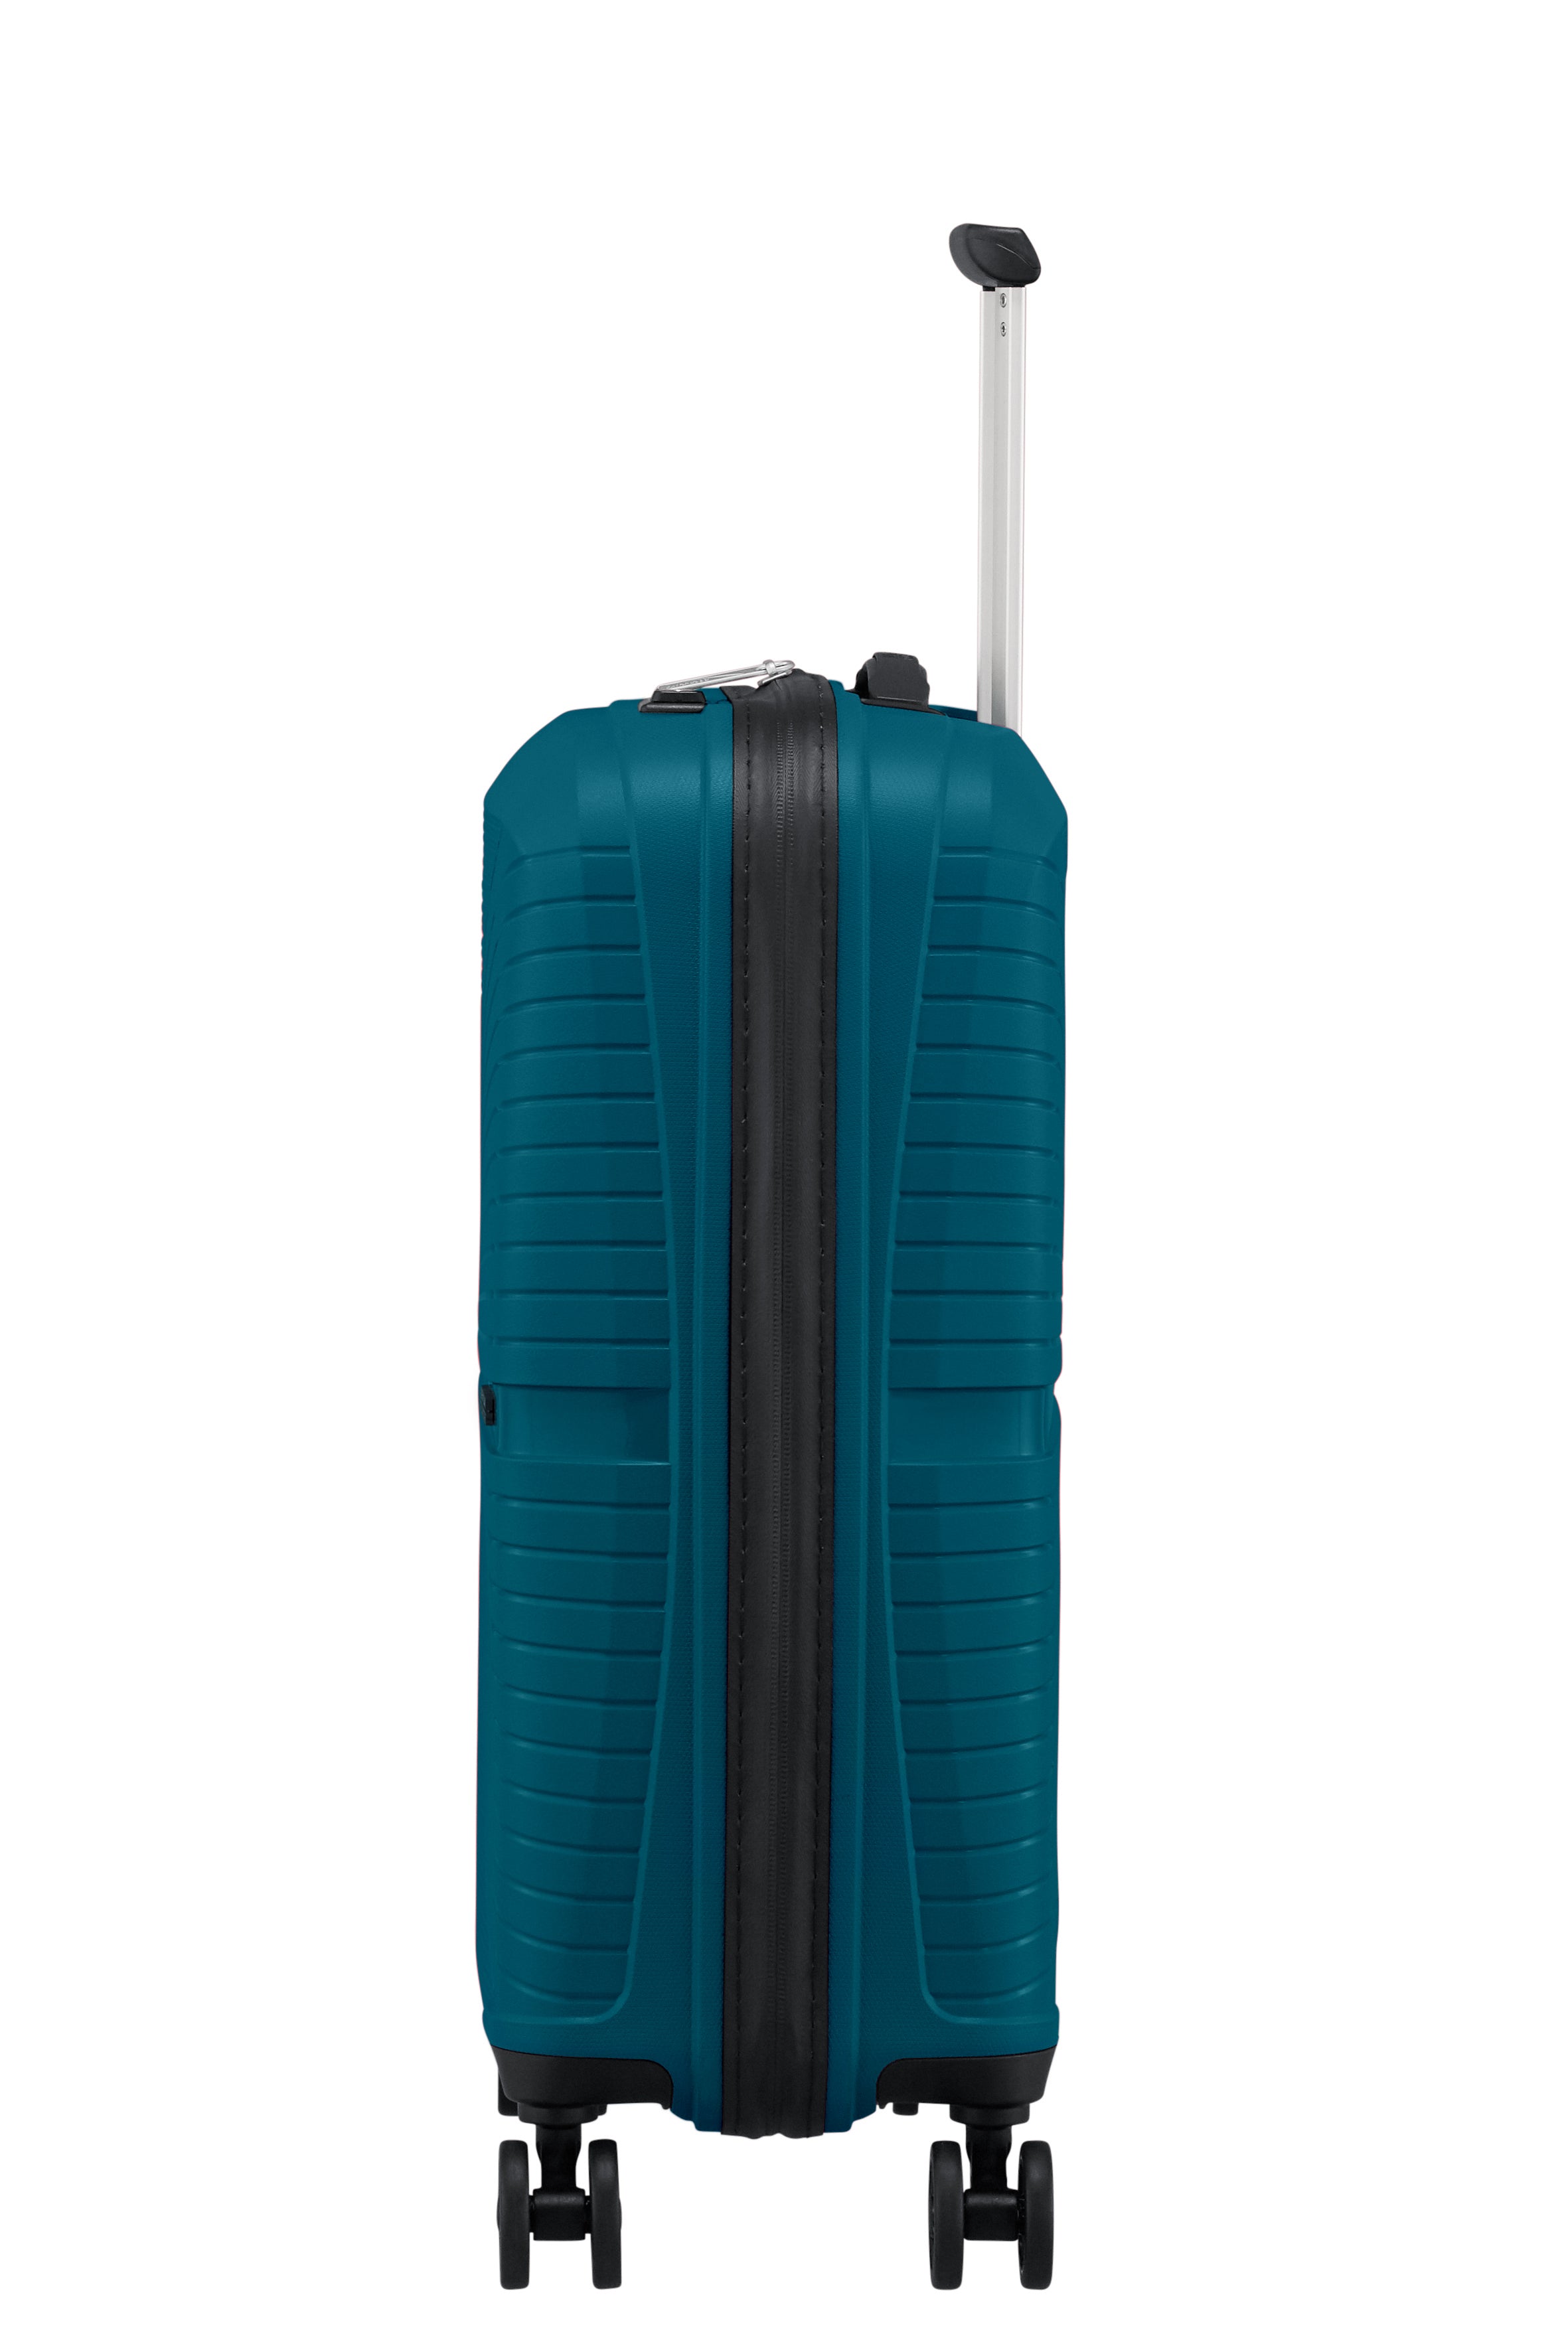 American Tourister - Airconic 55cm Small Suitcase - Deep Ocean-3